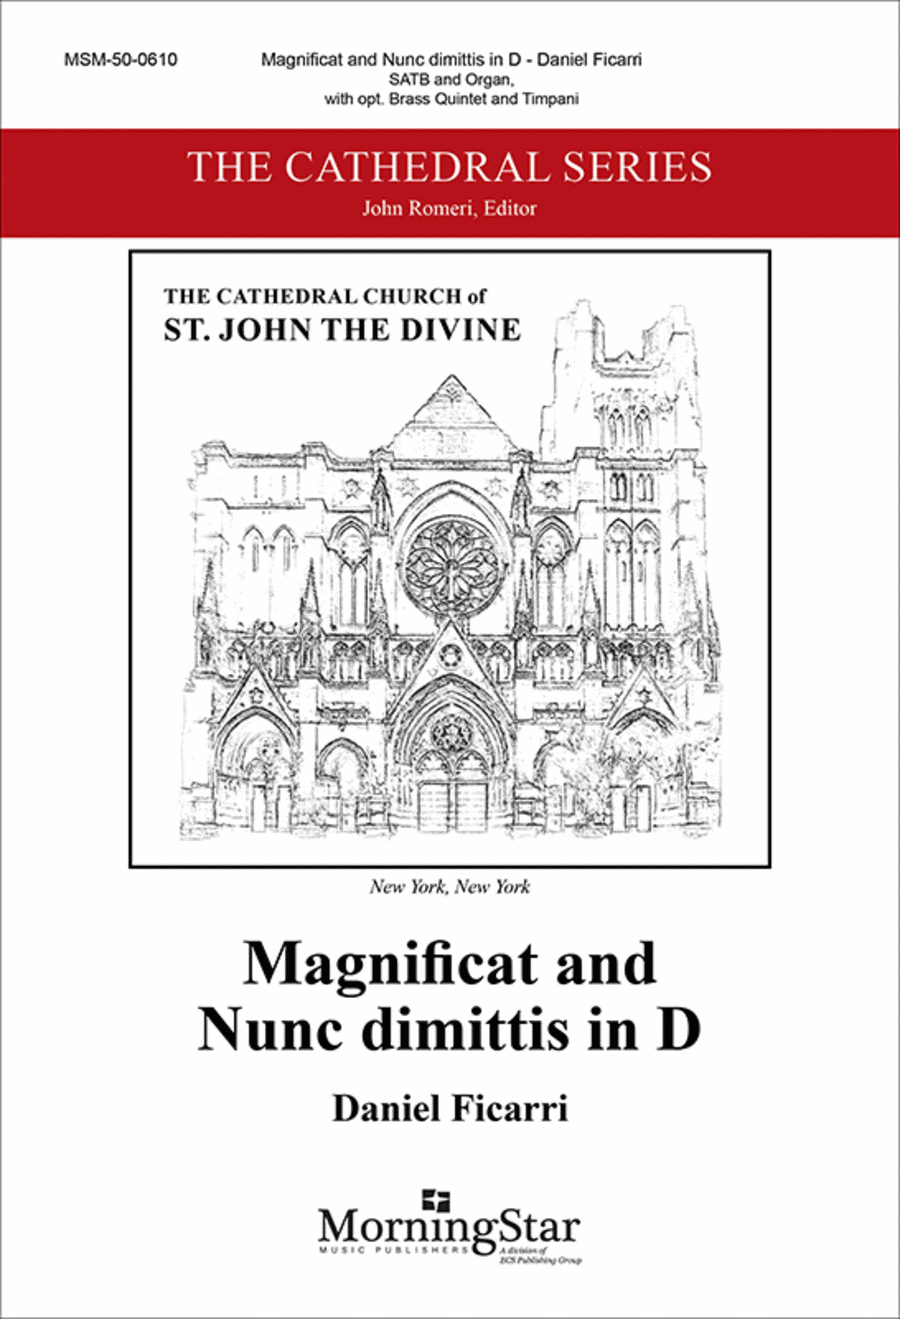 Magnificat and Nunc dimittis in D (Choral Score)